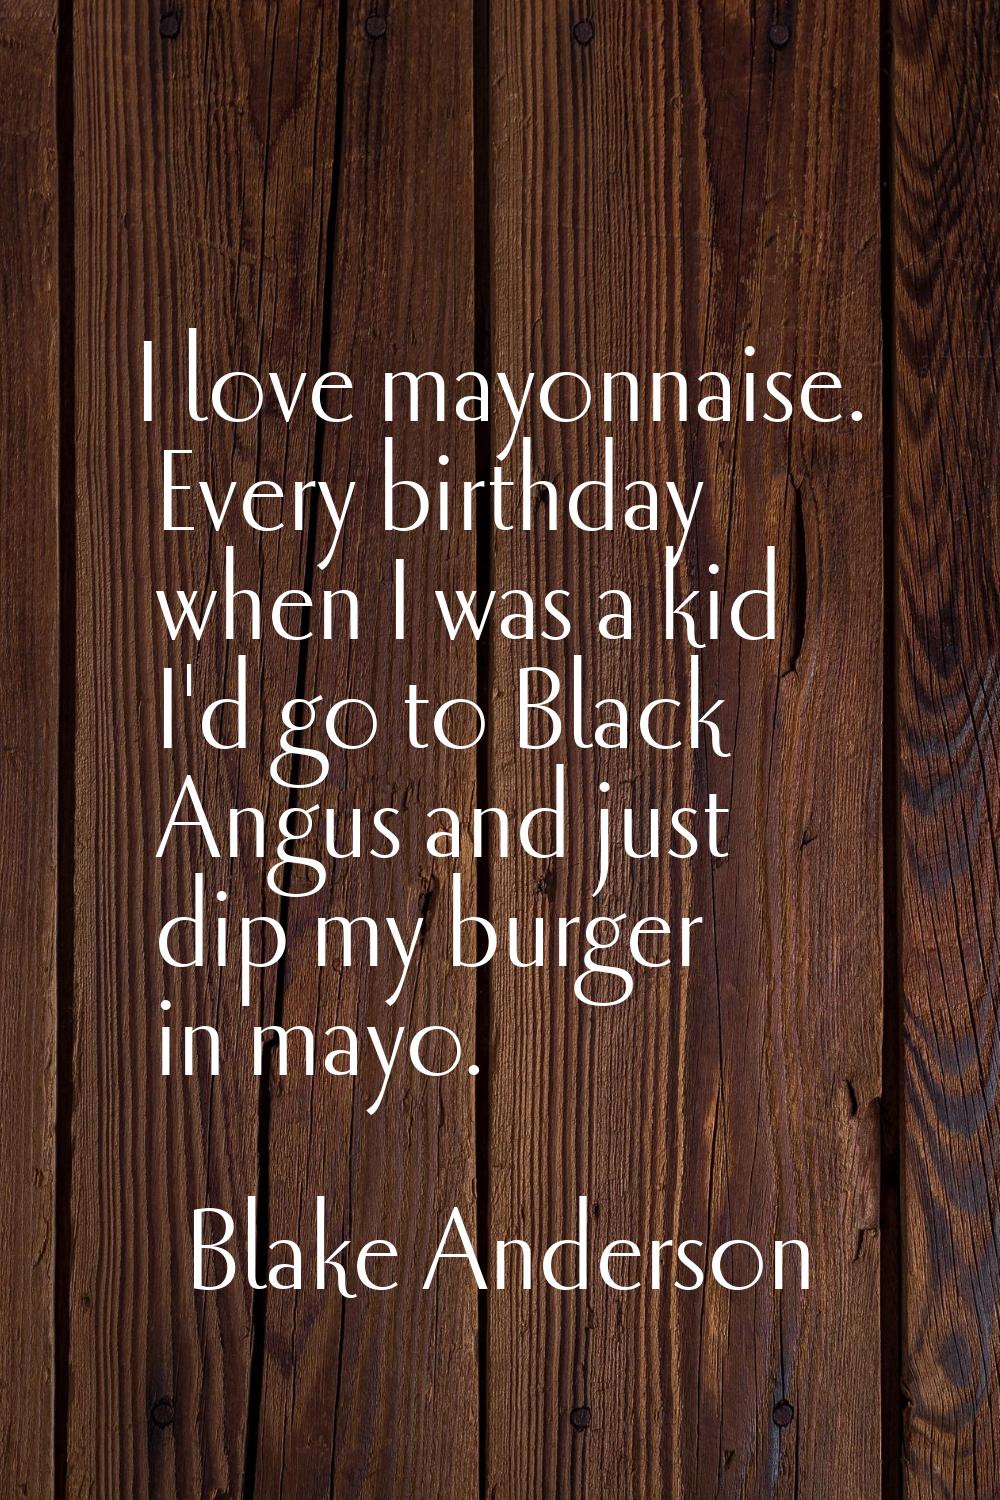 I love mayonnaise. Every birthday when I was a kid I'd go to Black Angus and just dip my burger in 